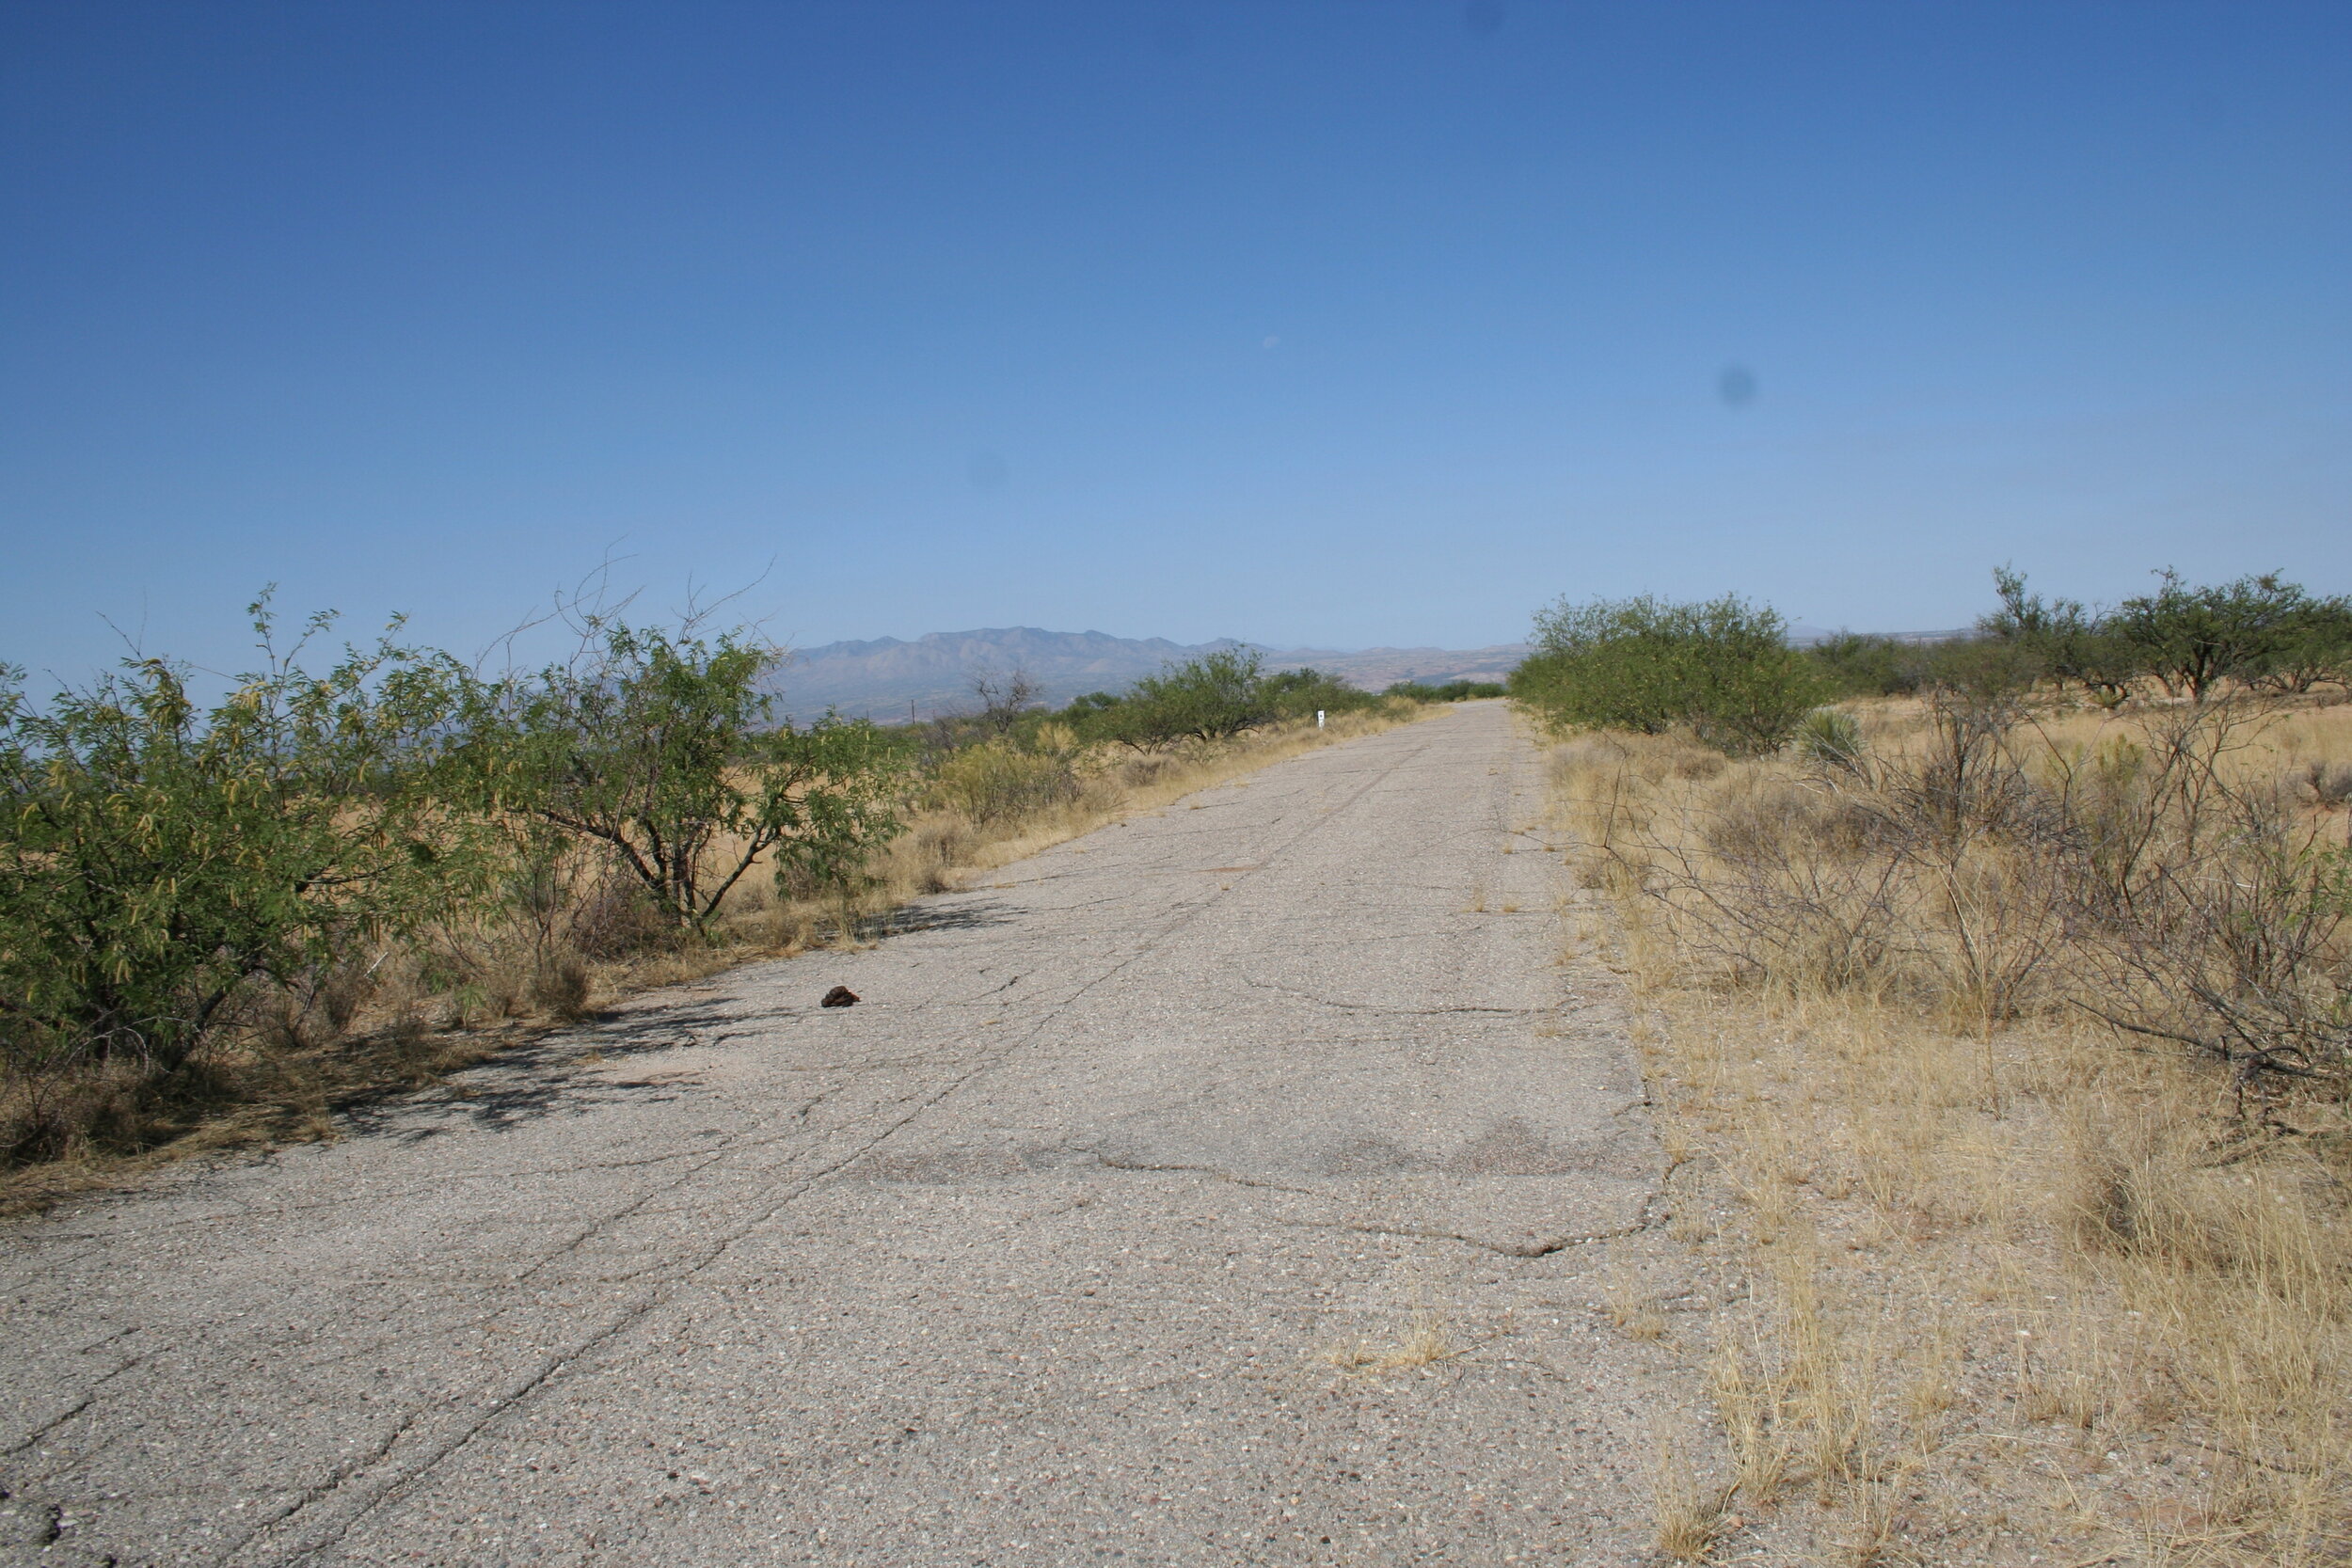   The road leading to 571-1 (private property).  